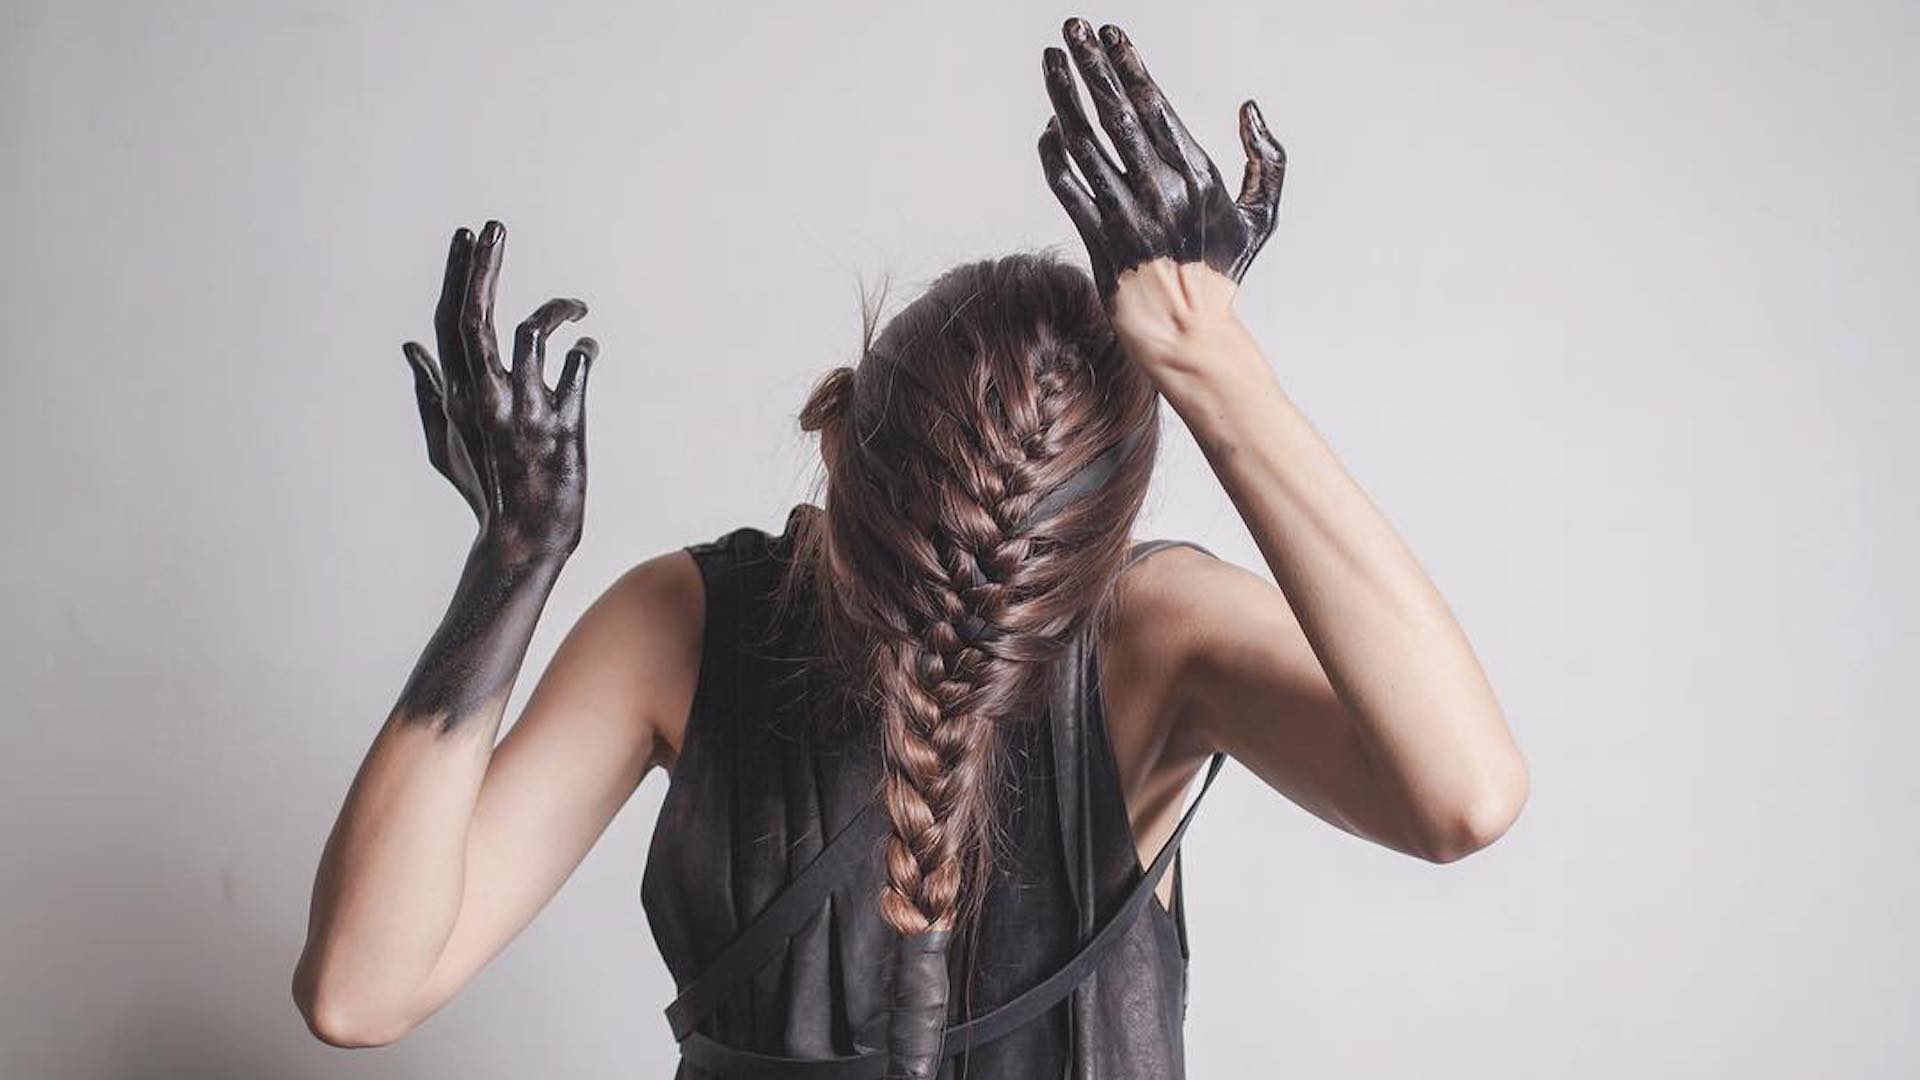 This week in Editors Choice: Tousled hair and outstretched hands